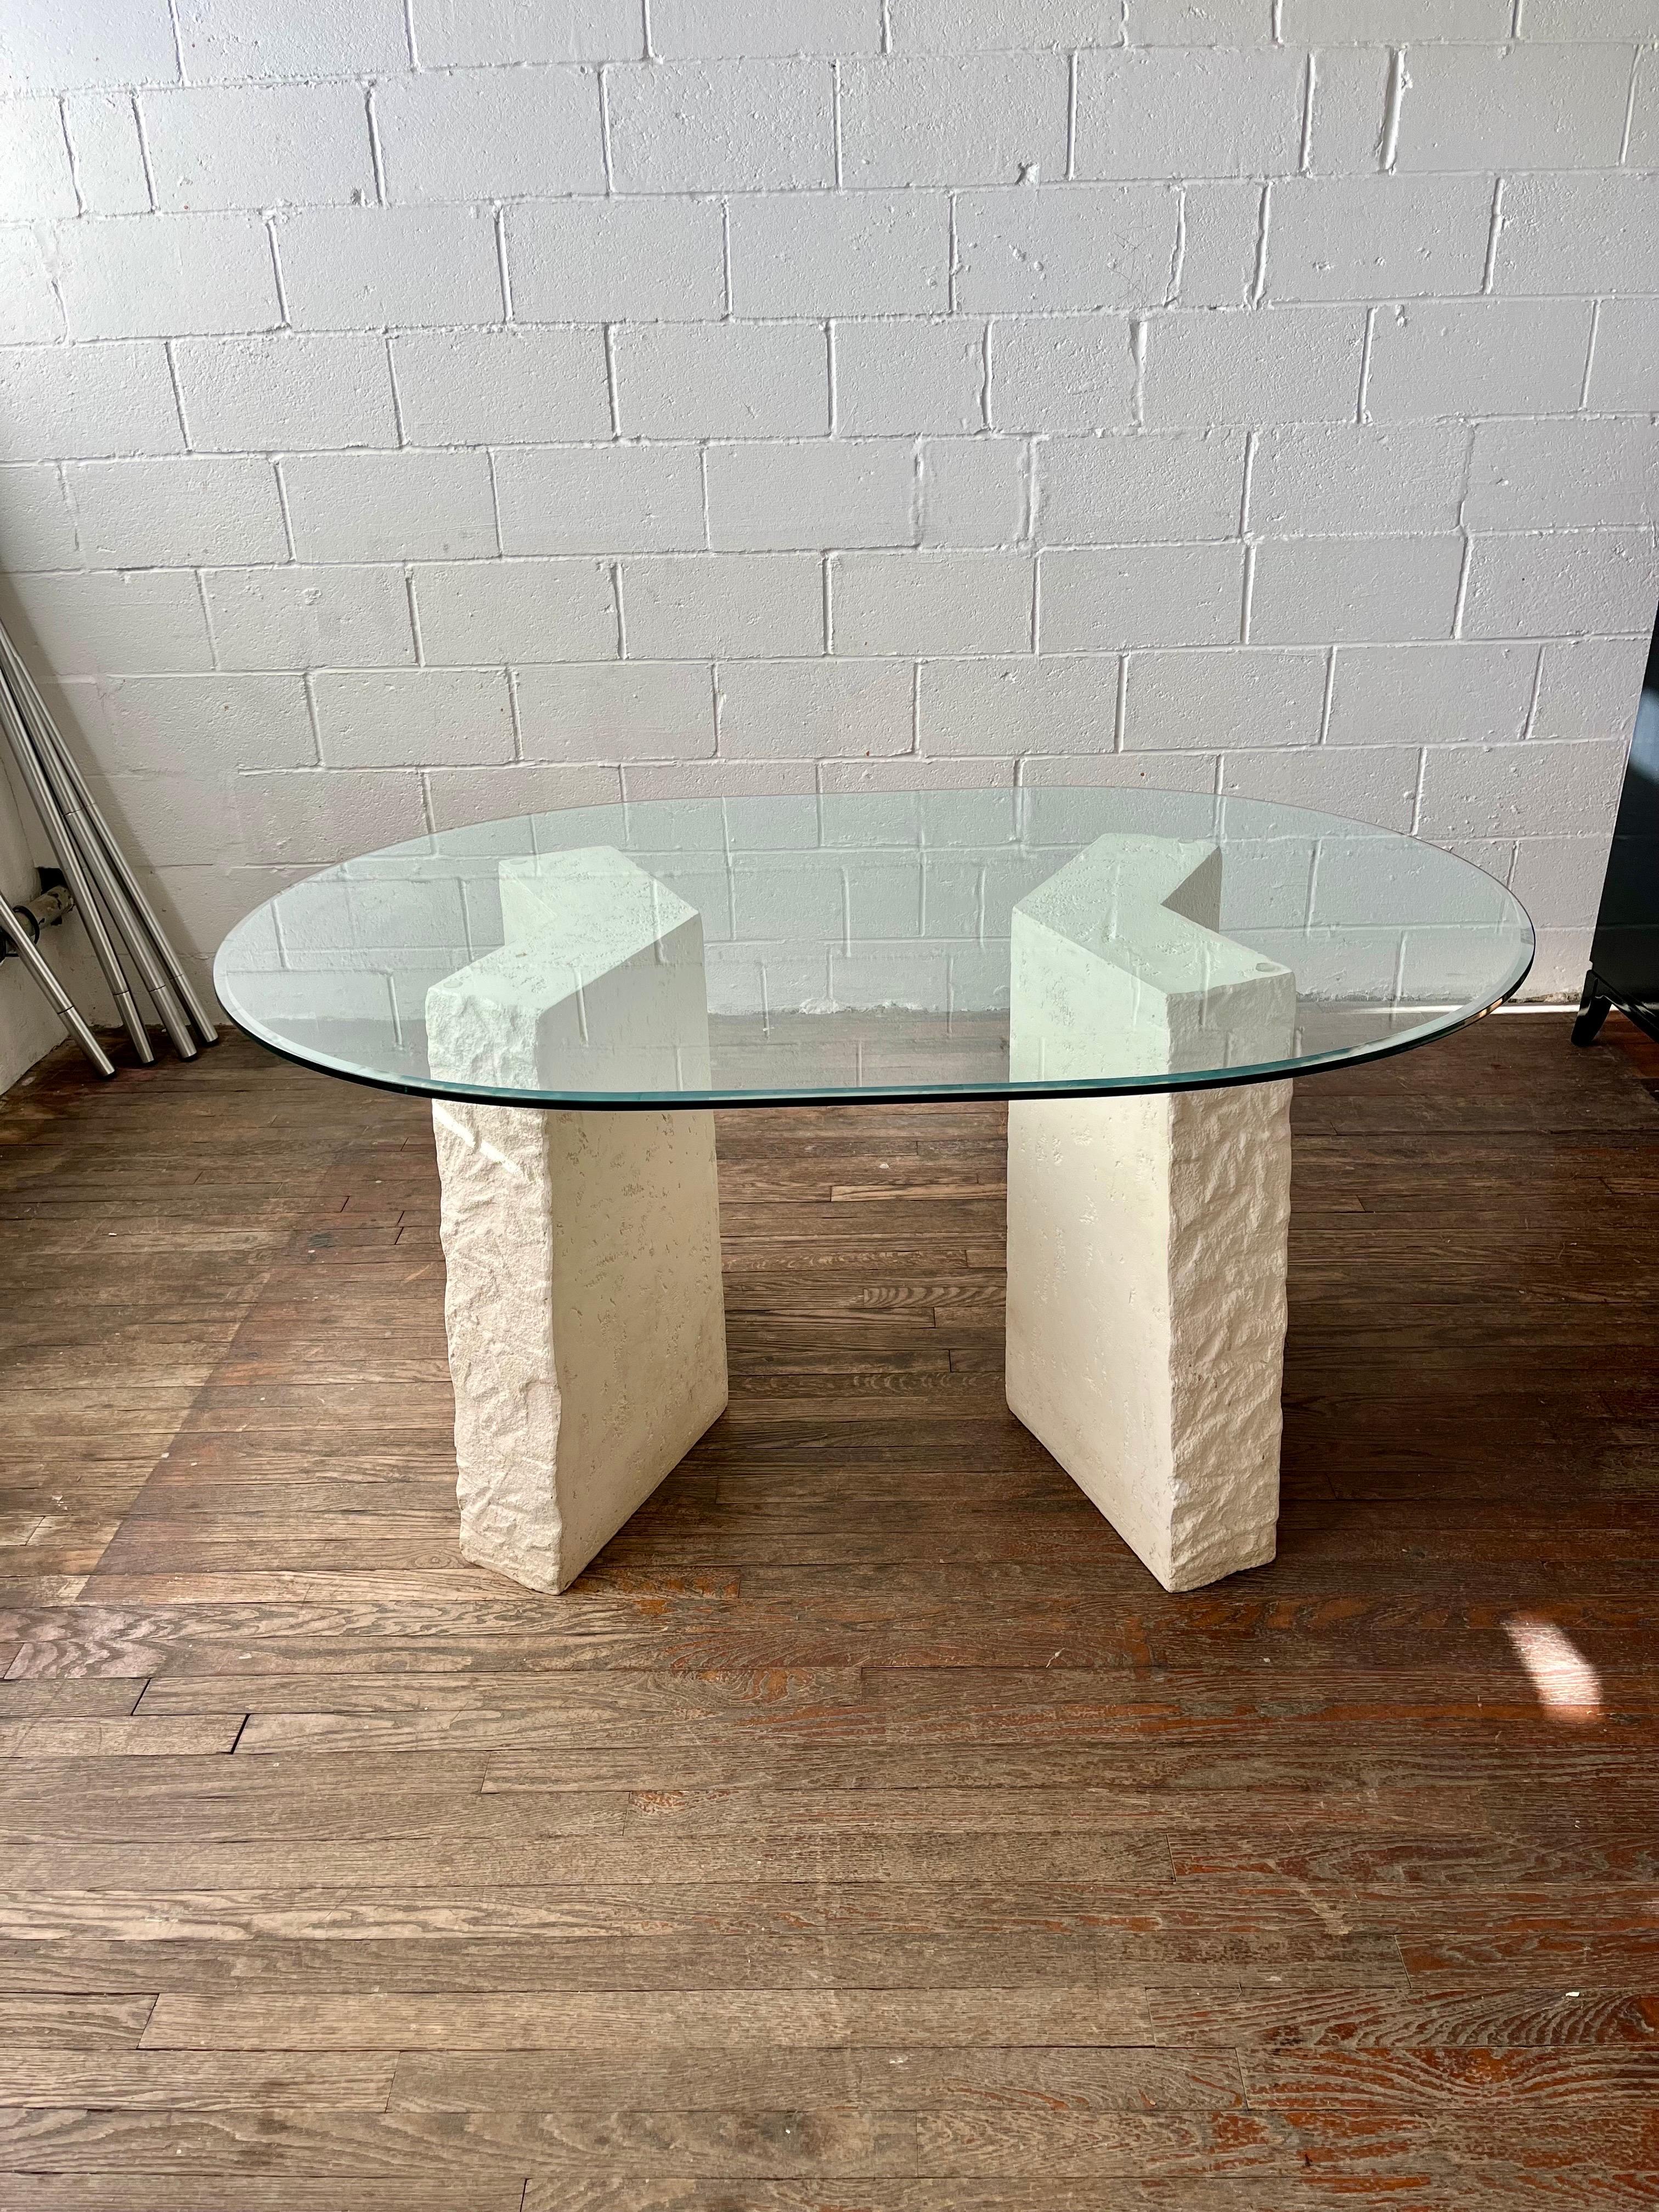 Postmodern Sculptural Plaster and Glass Dining Table and 4 Lacquer Chairs Italy In Good Condition For Sale In W Allenhurst, NJ